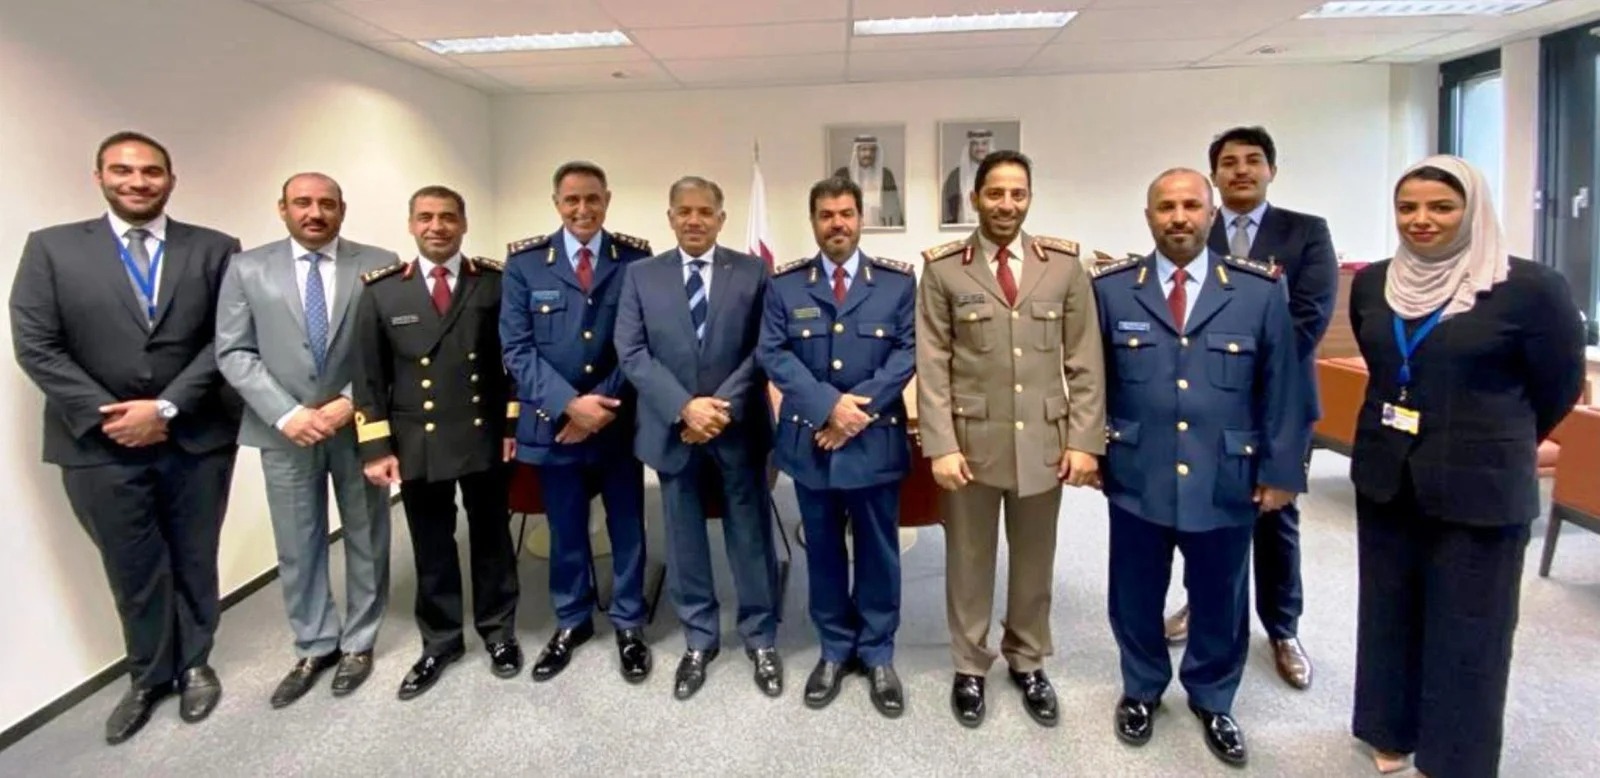 Qatar Inaugurates Its Military Representation in NATO Headquarters in Brussels